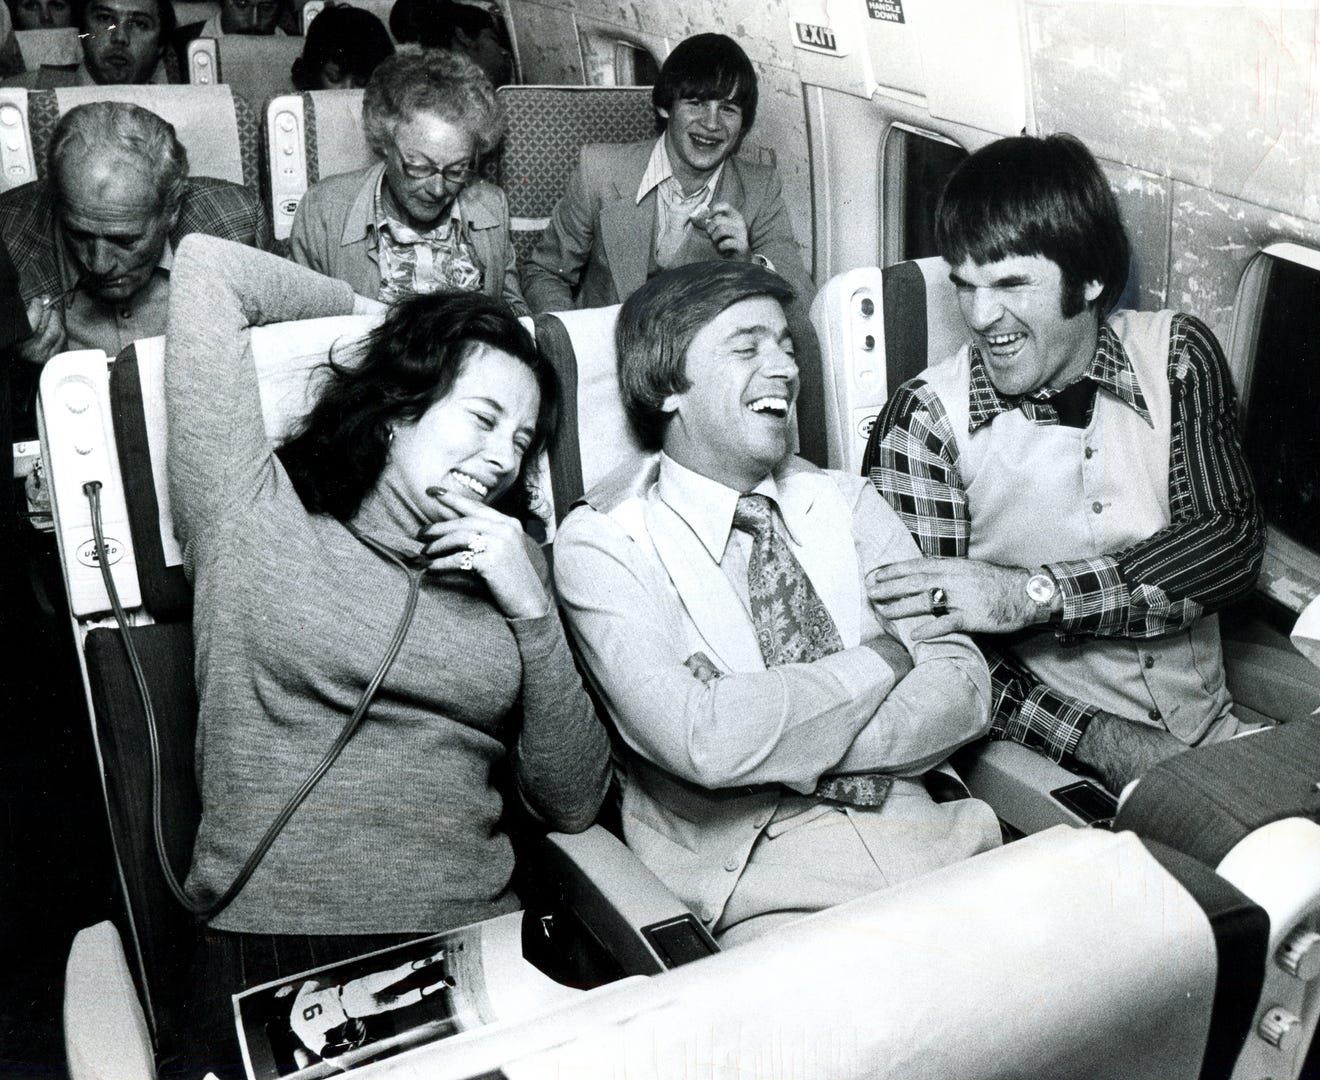 Marty Brennaman, center, Cincinnati Reds broadcaster sits with Pete Rose and Rose's first wife, Karolyn, on a flight from New York to Cincinnati after beating the NY Yankees in the 1976 World Series. Enquirer file photo by Mark Treitel, published Oct. 23, 1976.